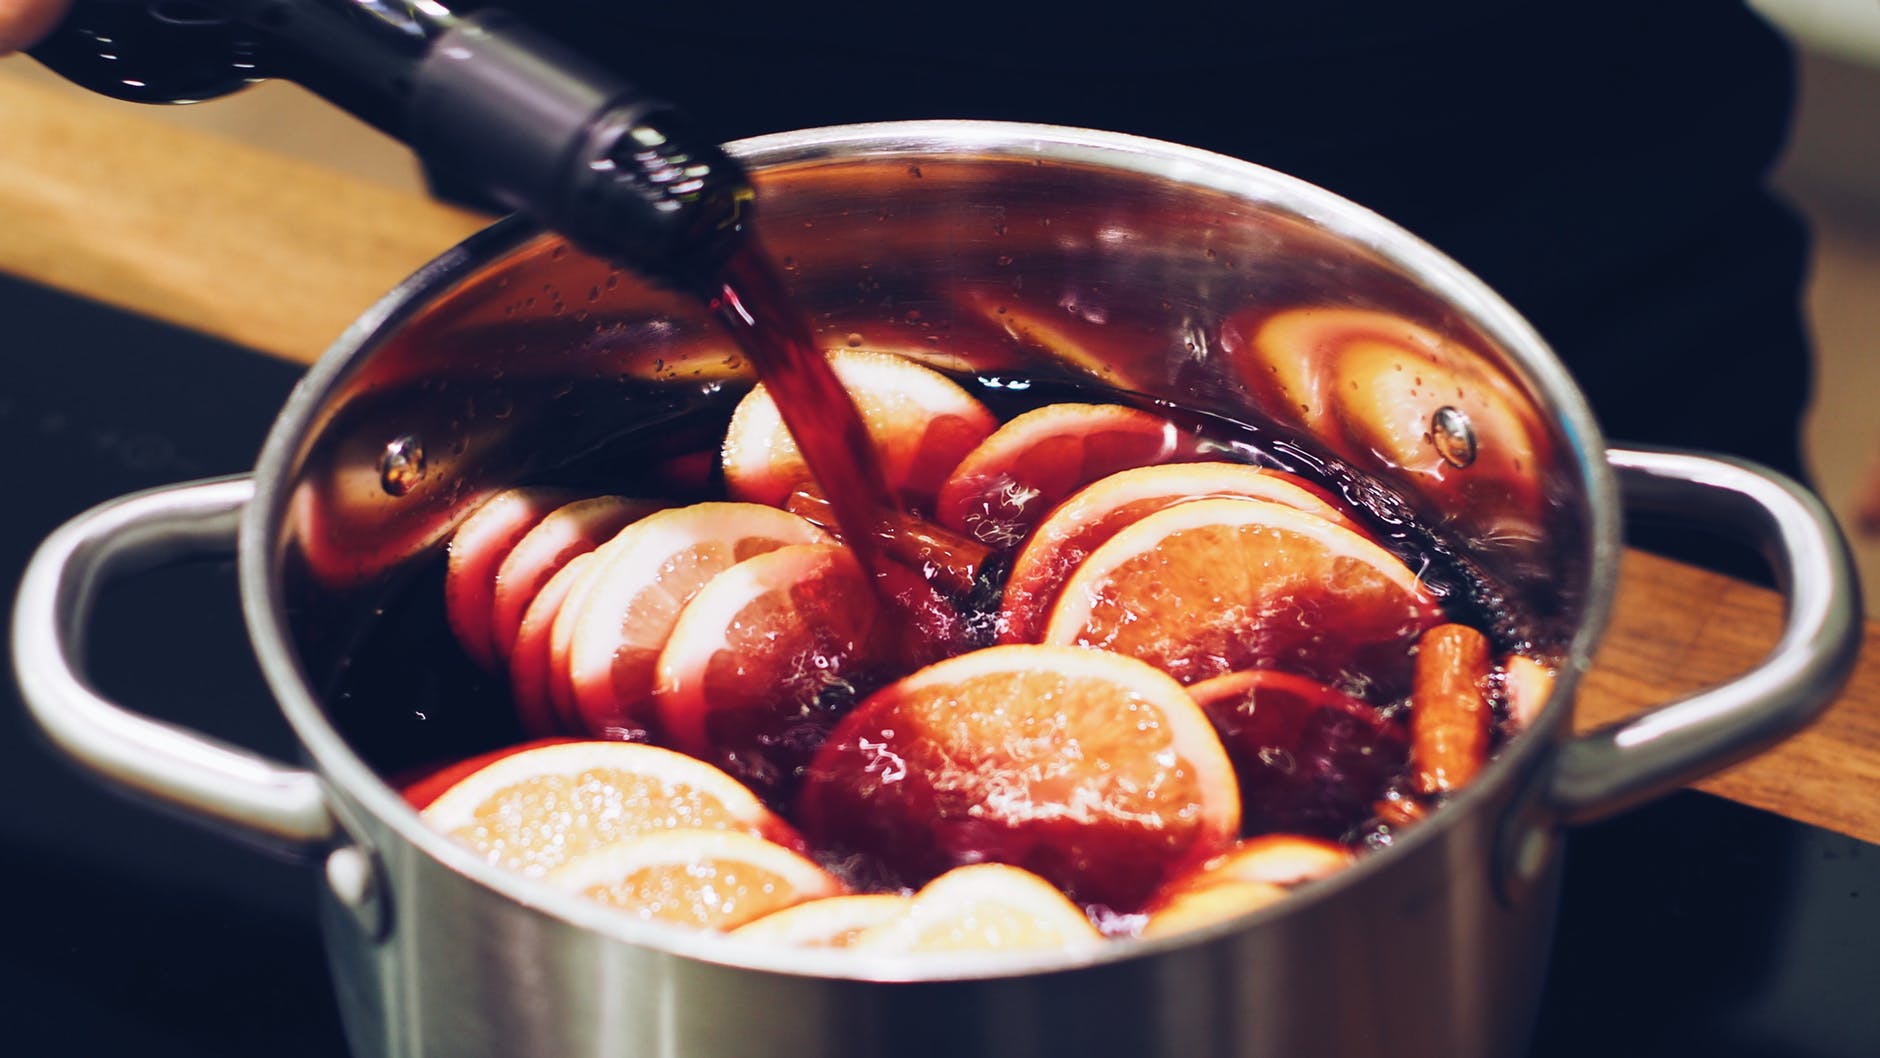 Red wine being poured into a saucepan filled with citrus fruit